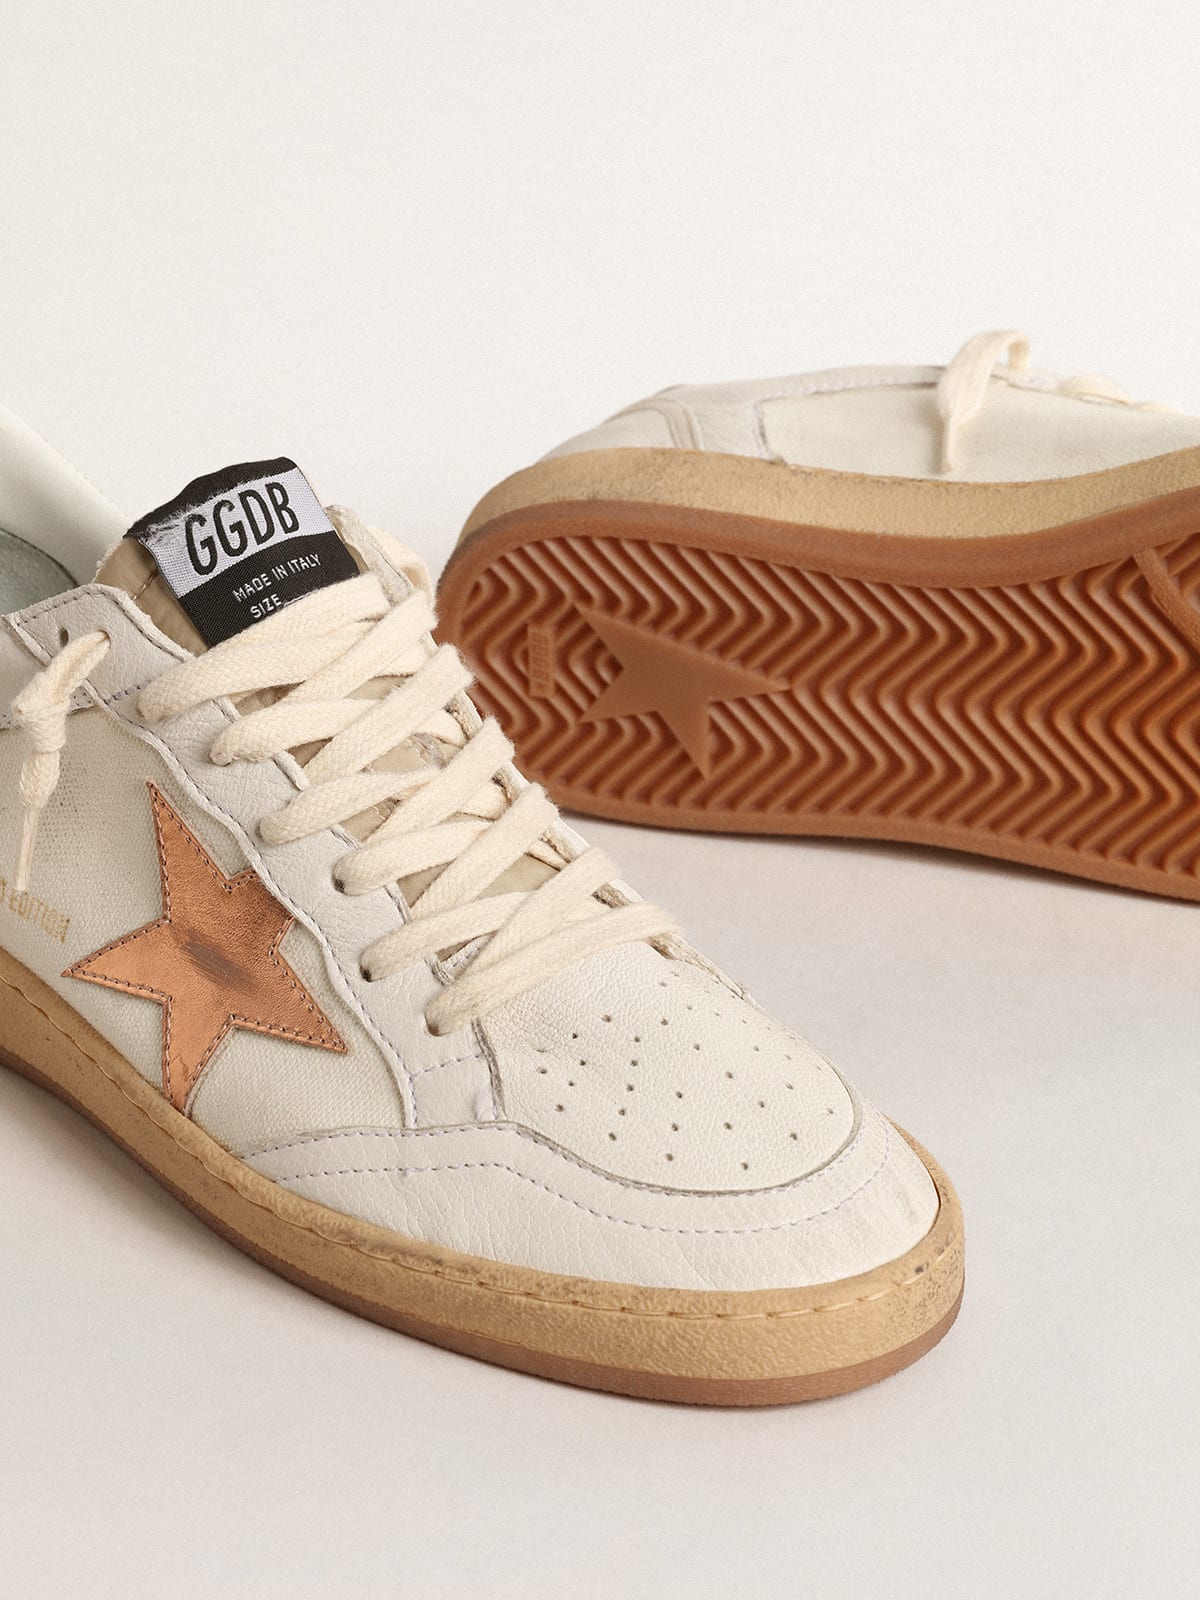 Golden Goose - Ball Star in canvas and nappa with bronze metallic leather star in 